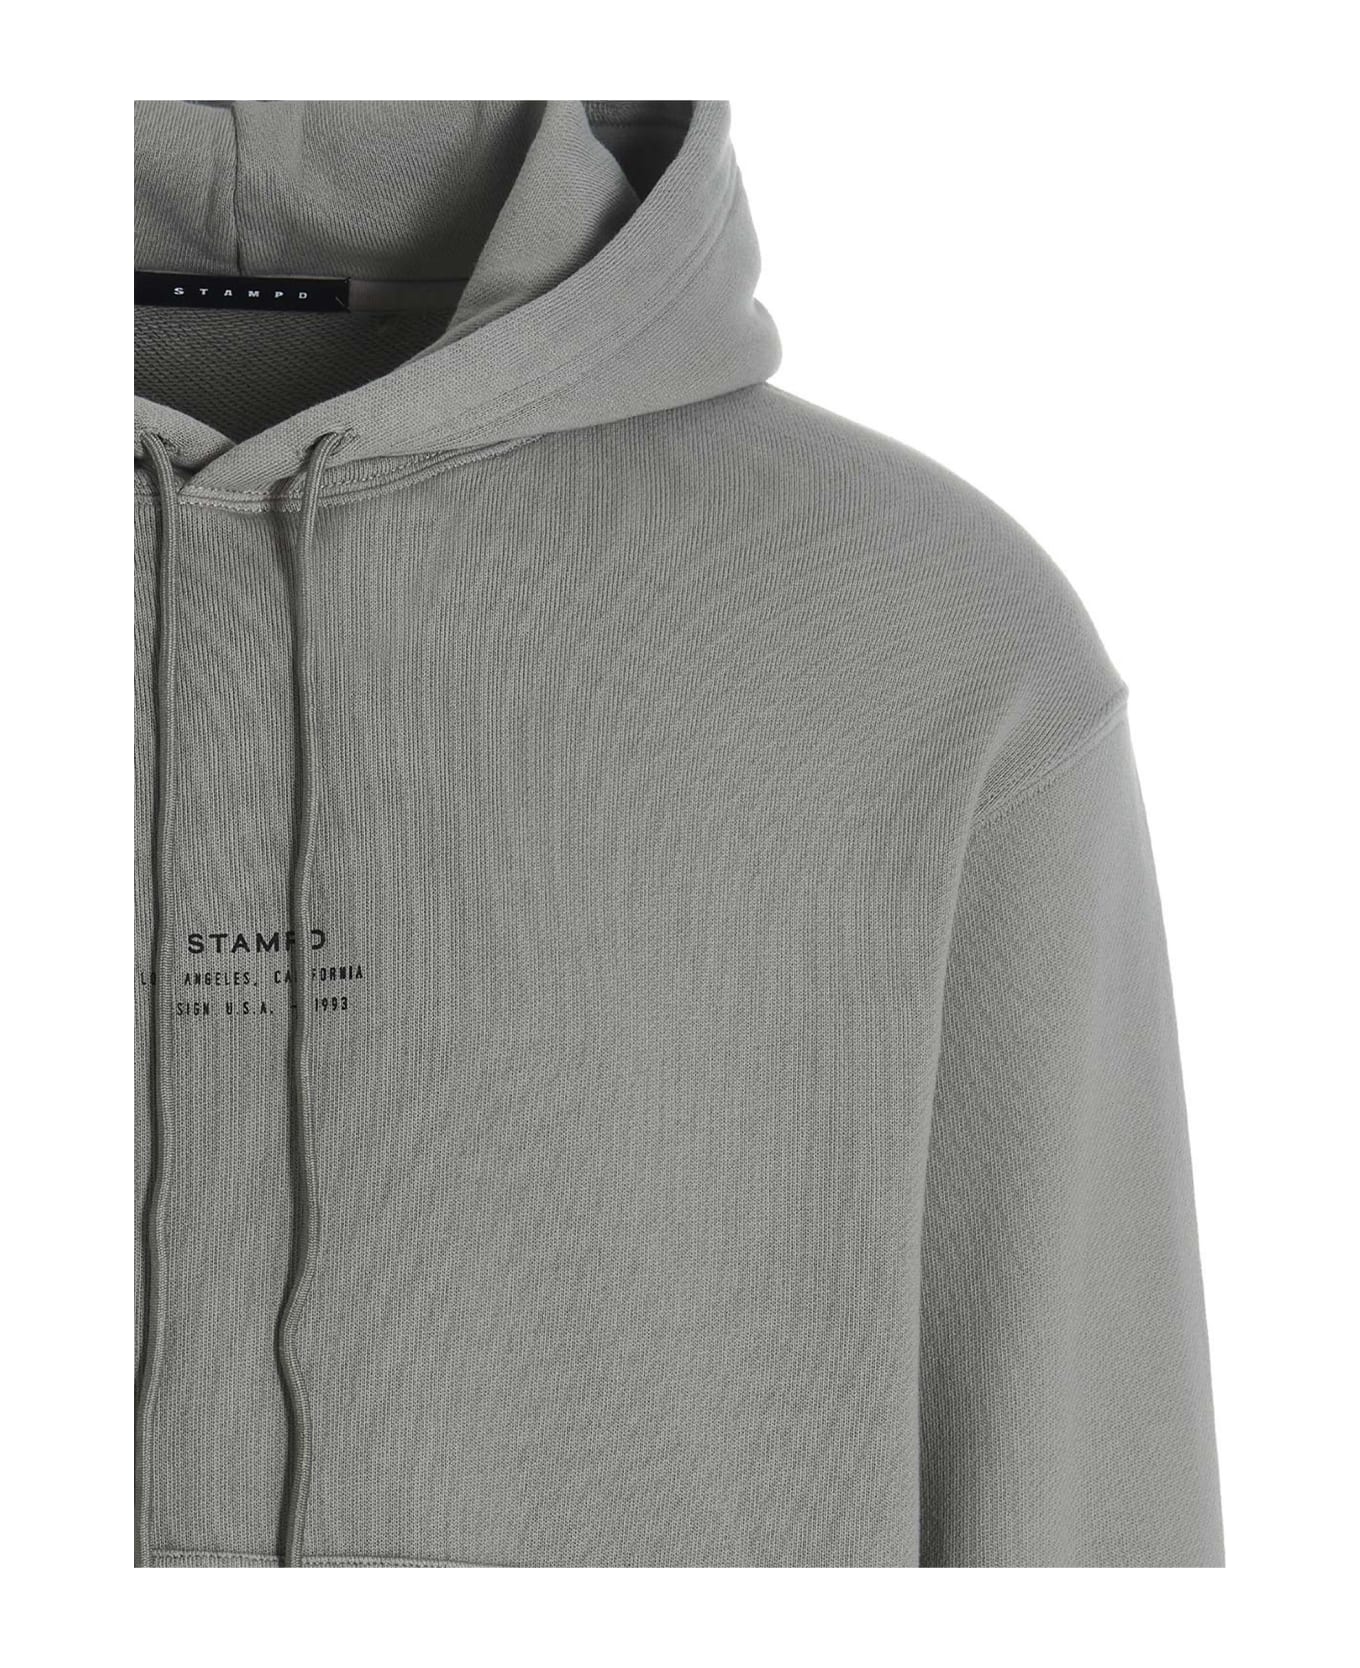 Stampd 'classic Stack Logo' Hoodie - Gray